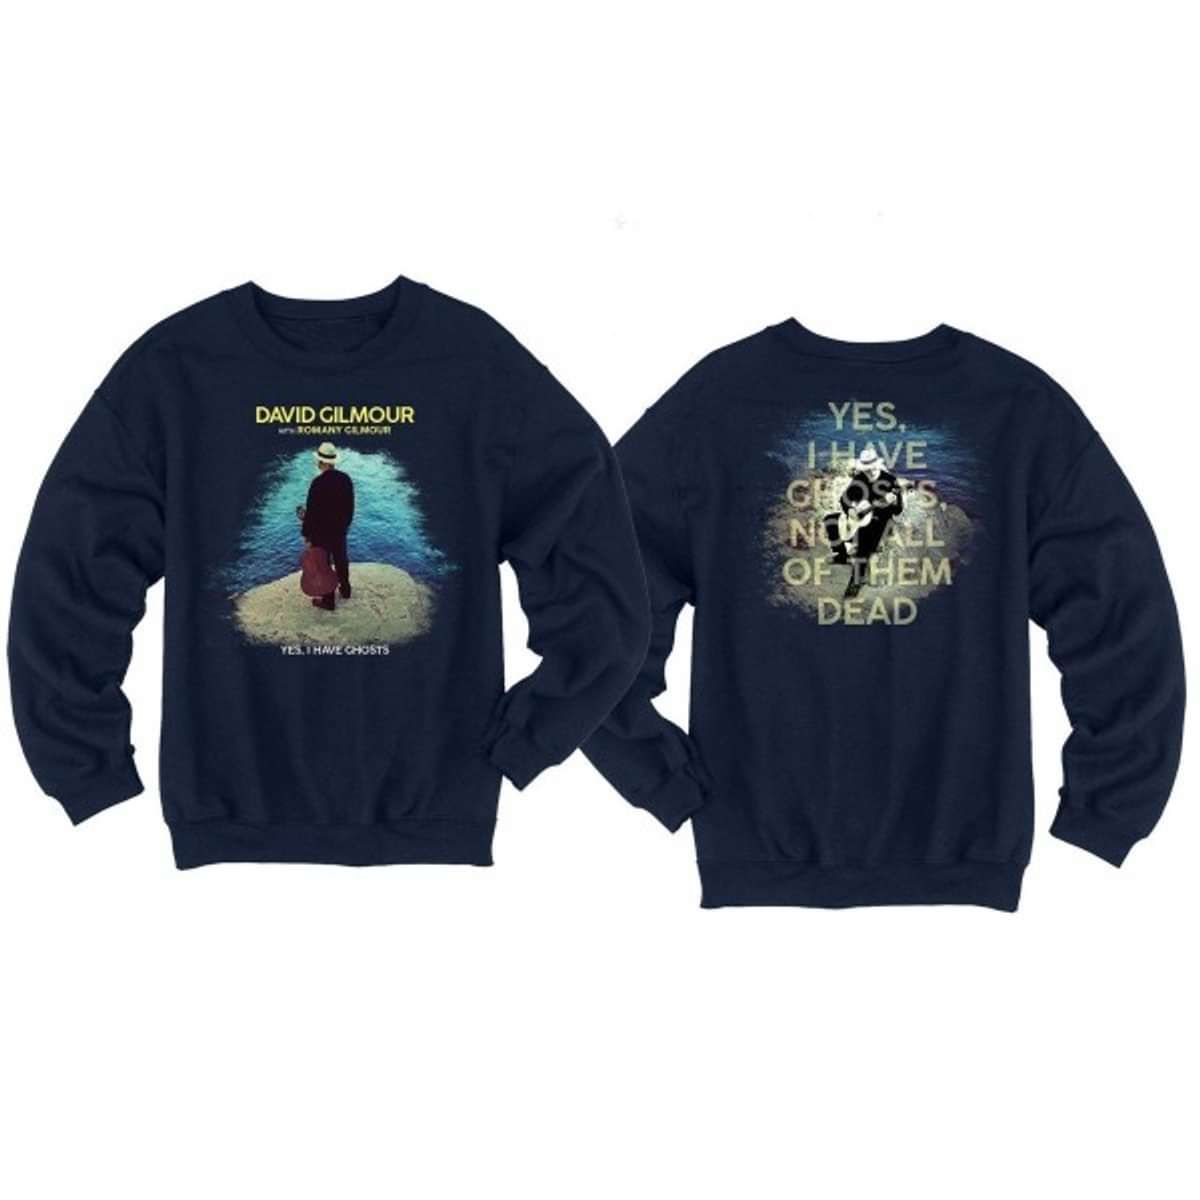 David Gilmour - Yes, I Have Ghosts Navy Crewneck